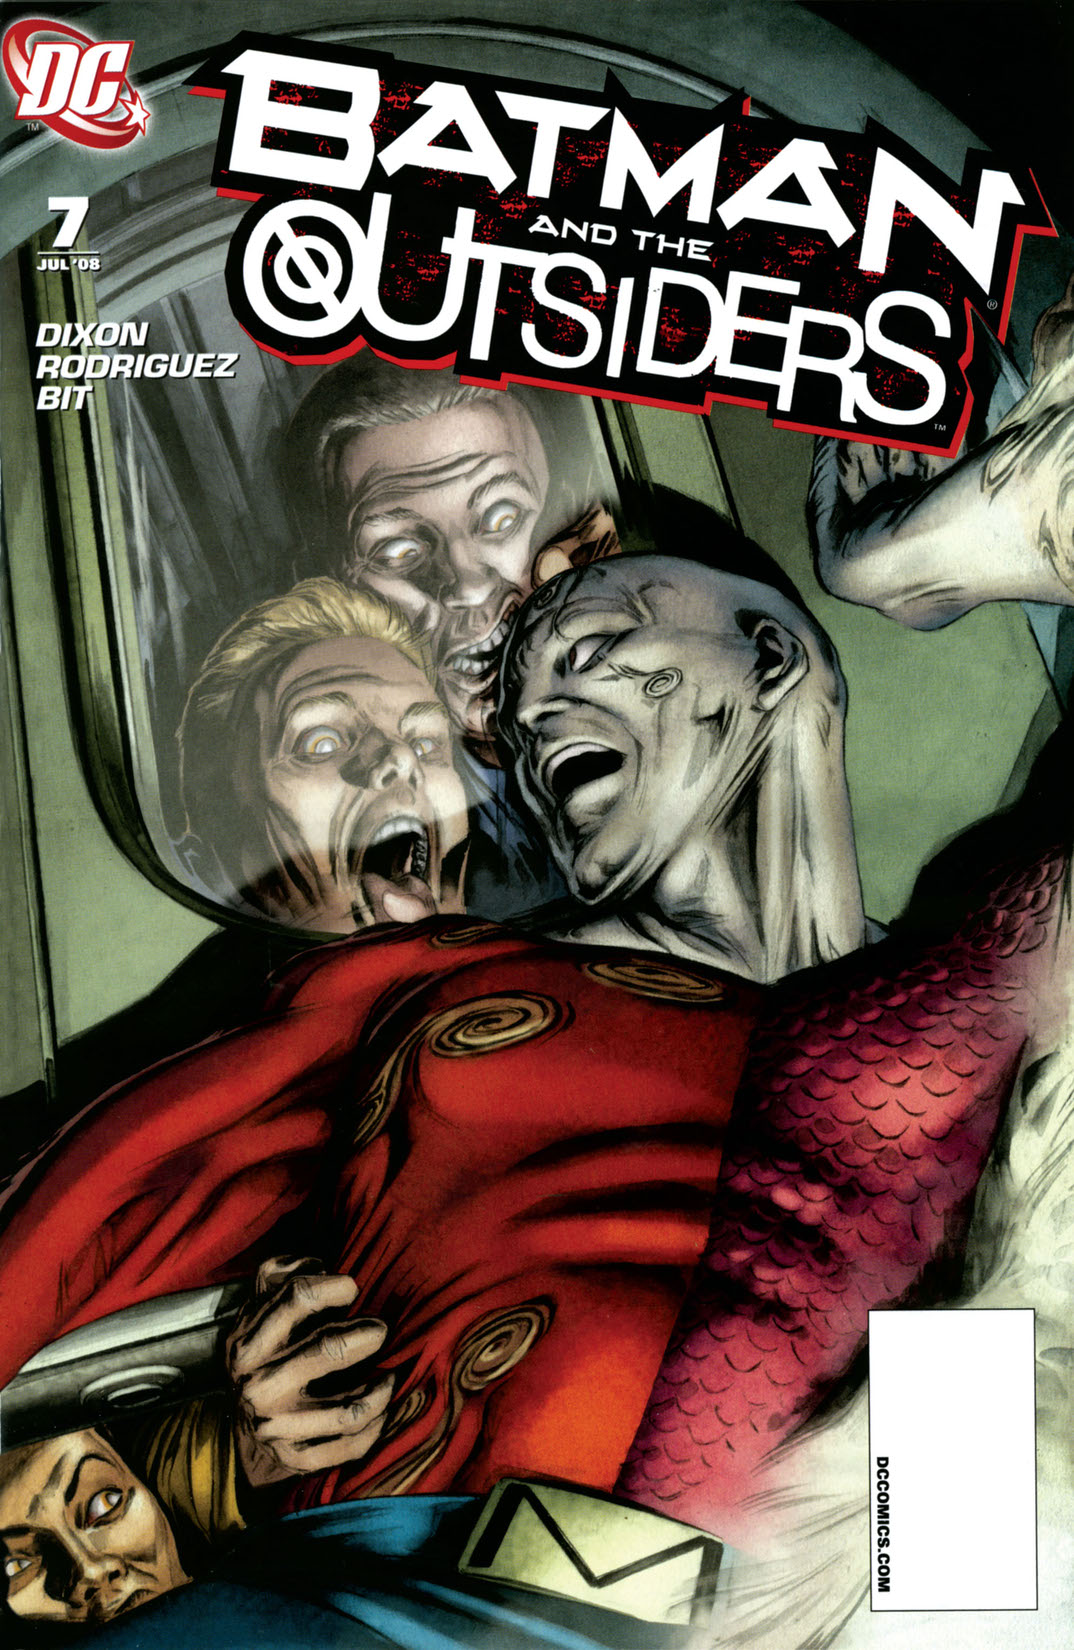 Batman and the Outsiders (2007-) #7 preview images